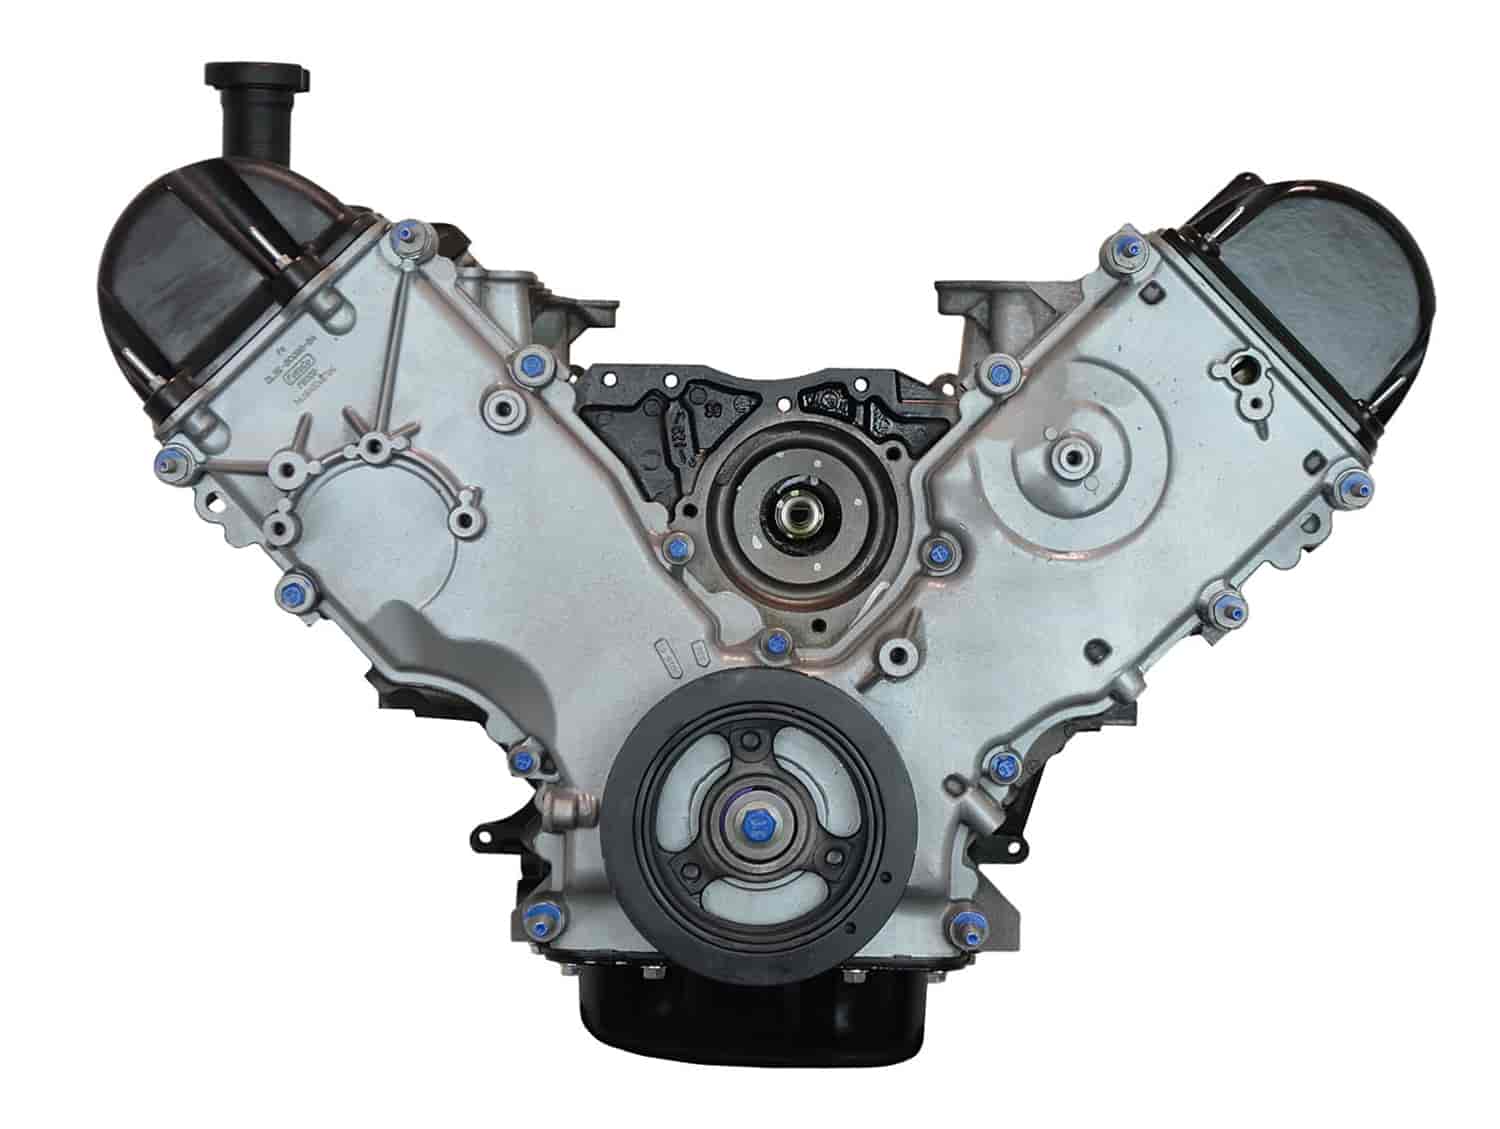 Remanufactured Crate Engine for 2002-2008 Ford E-Series Van